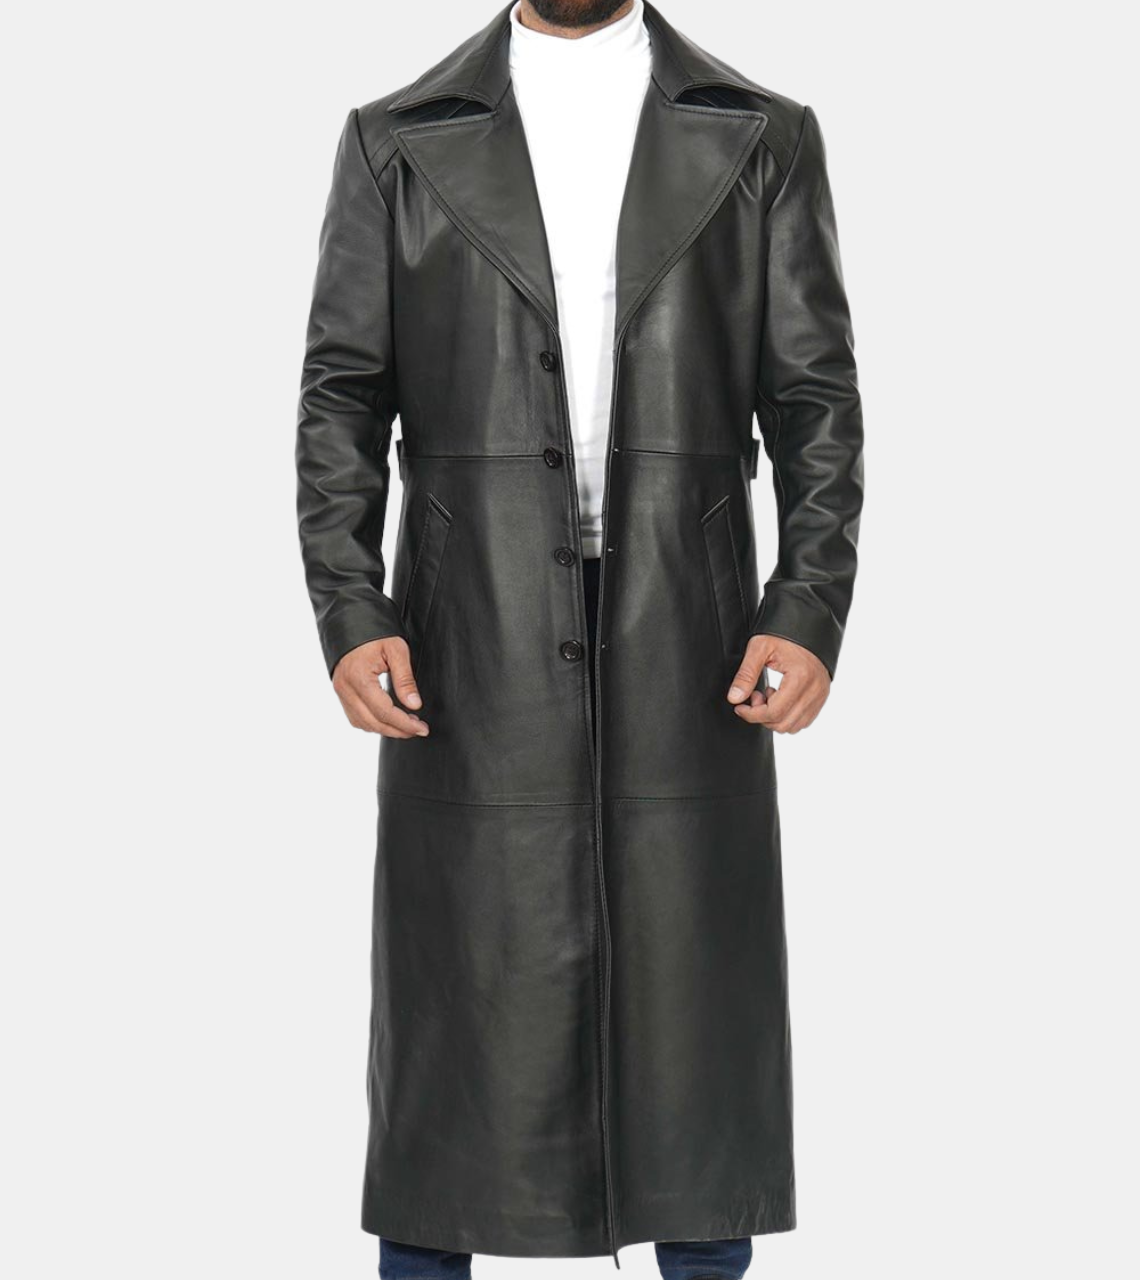 Indy Men's Black Leather Trench Coat